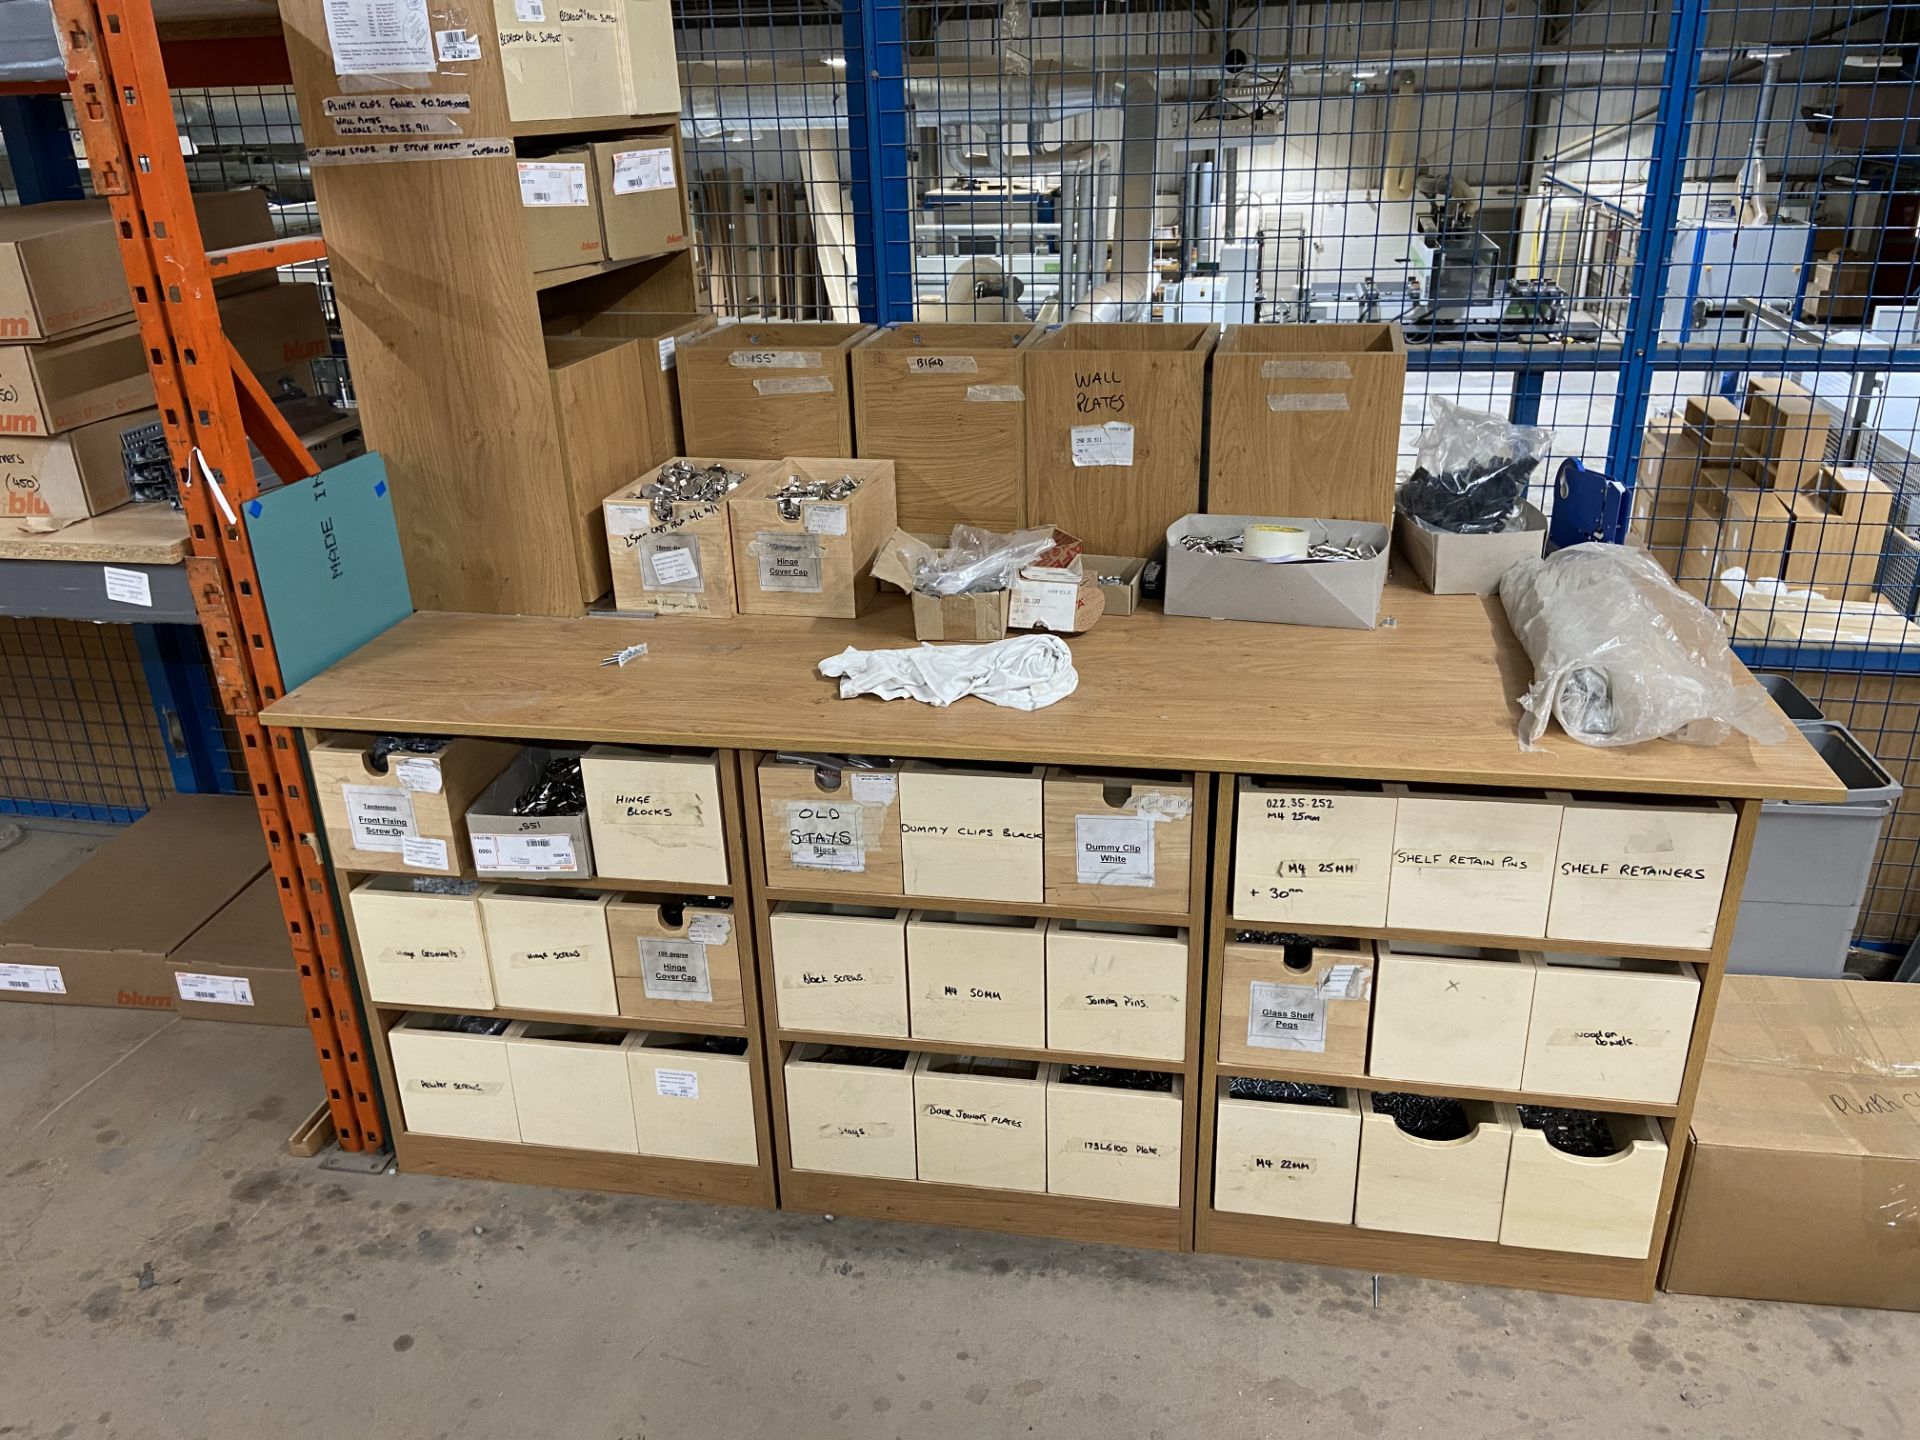 Assorted kitchen and bedroom furniture fixtures and fittings located on mezzanine store area, - Image 16 of 45